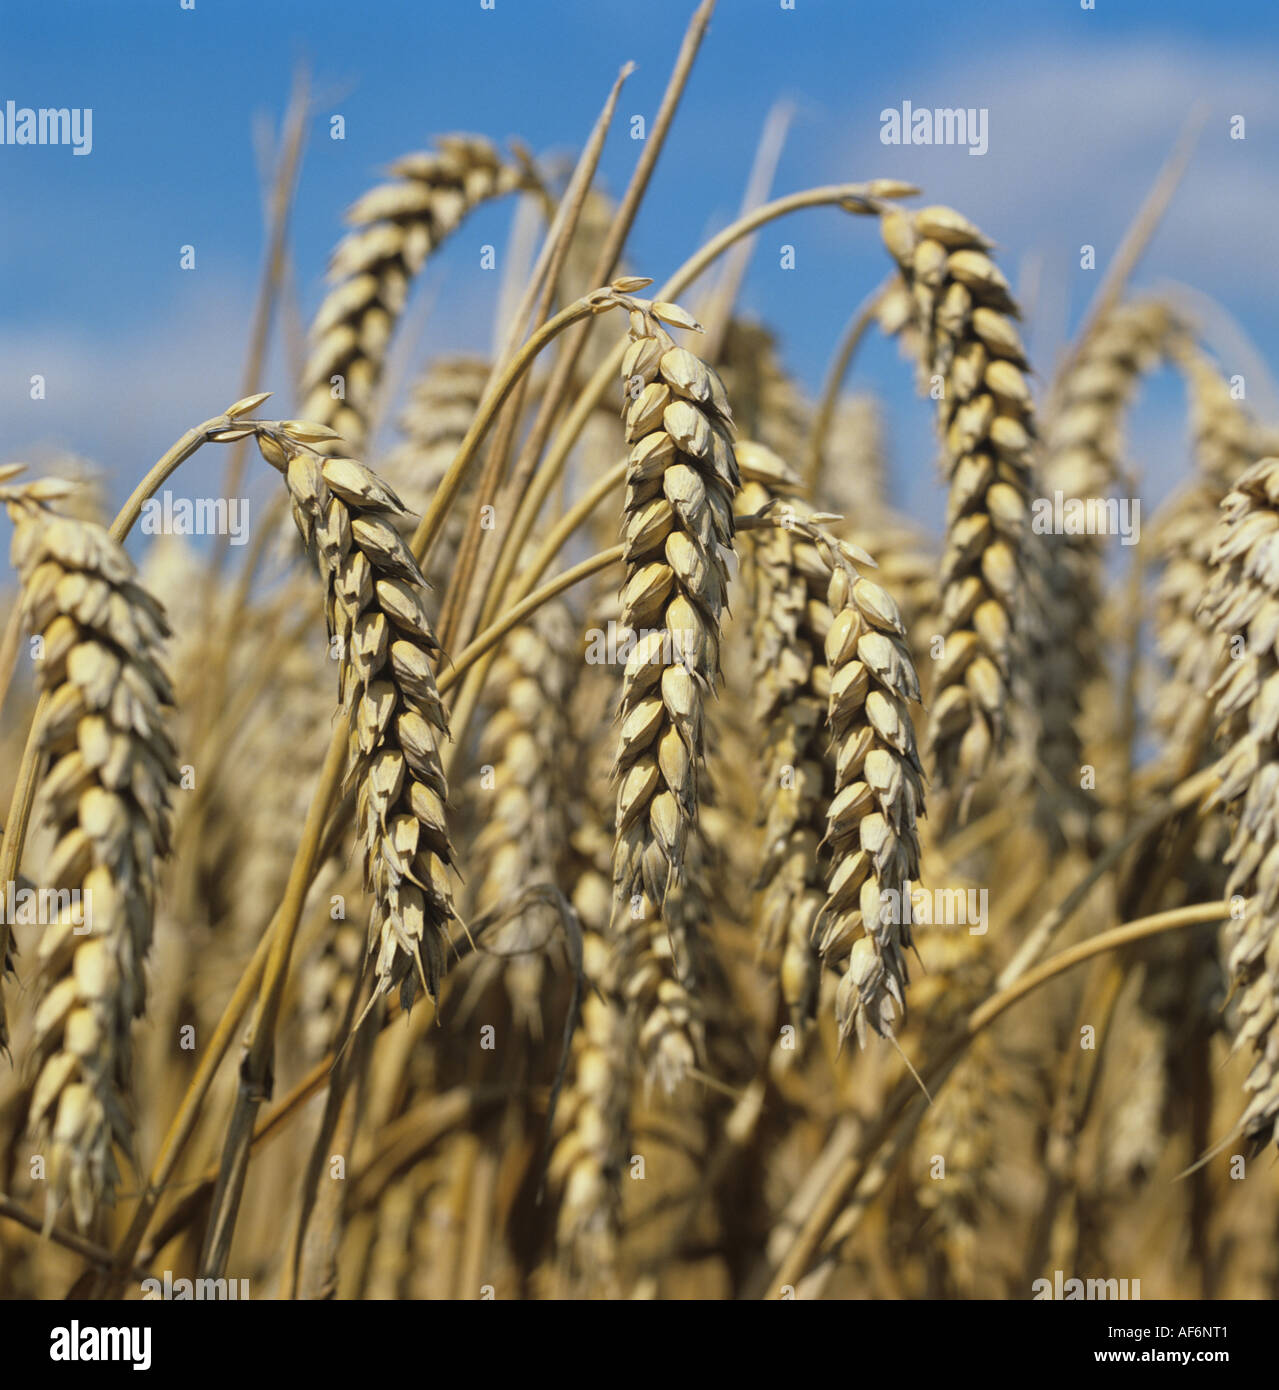 Ripe ears of wheat bent over at harvest Stock Photo